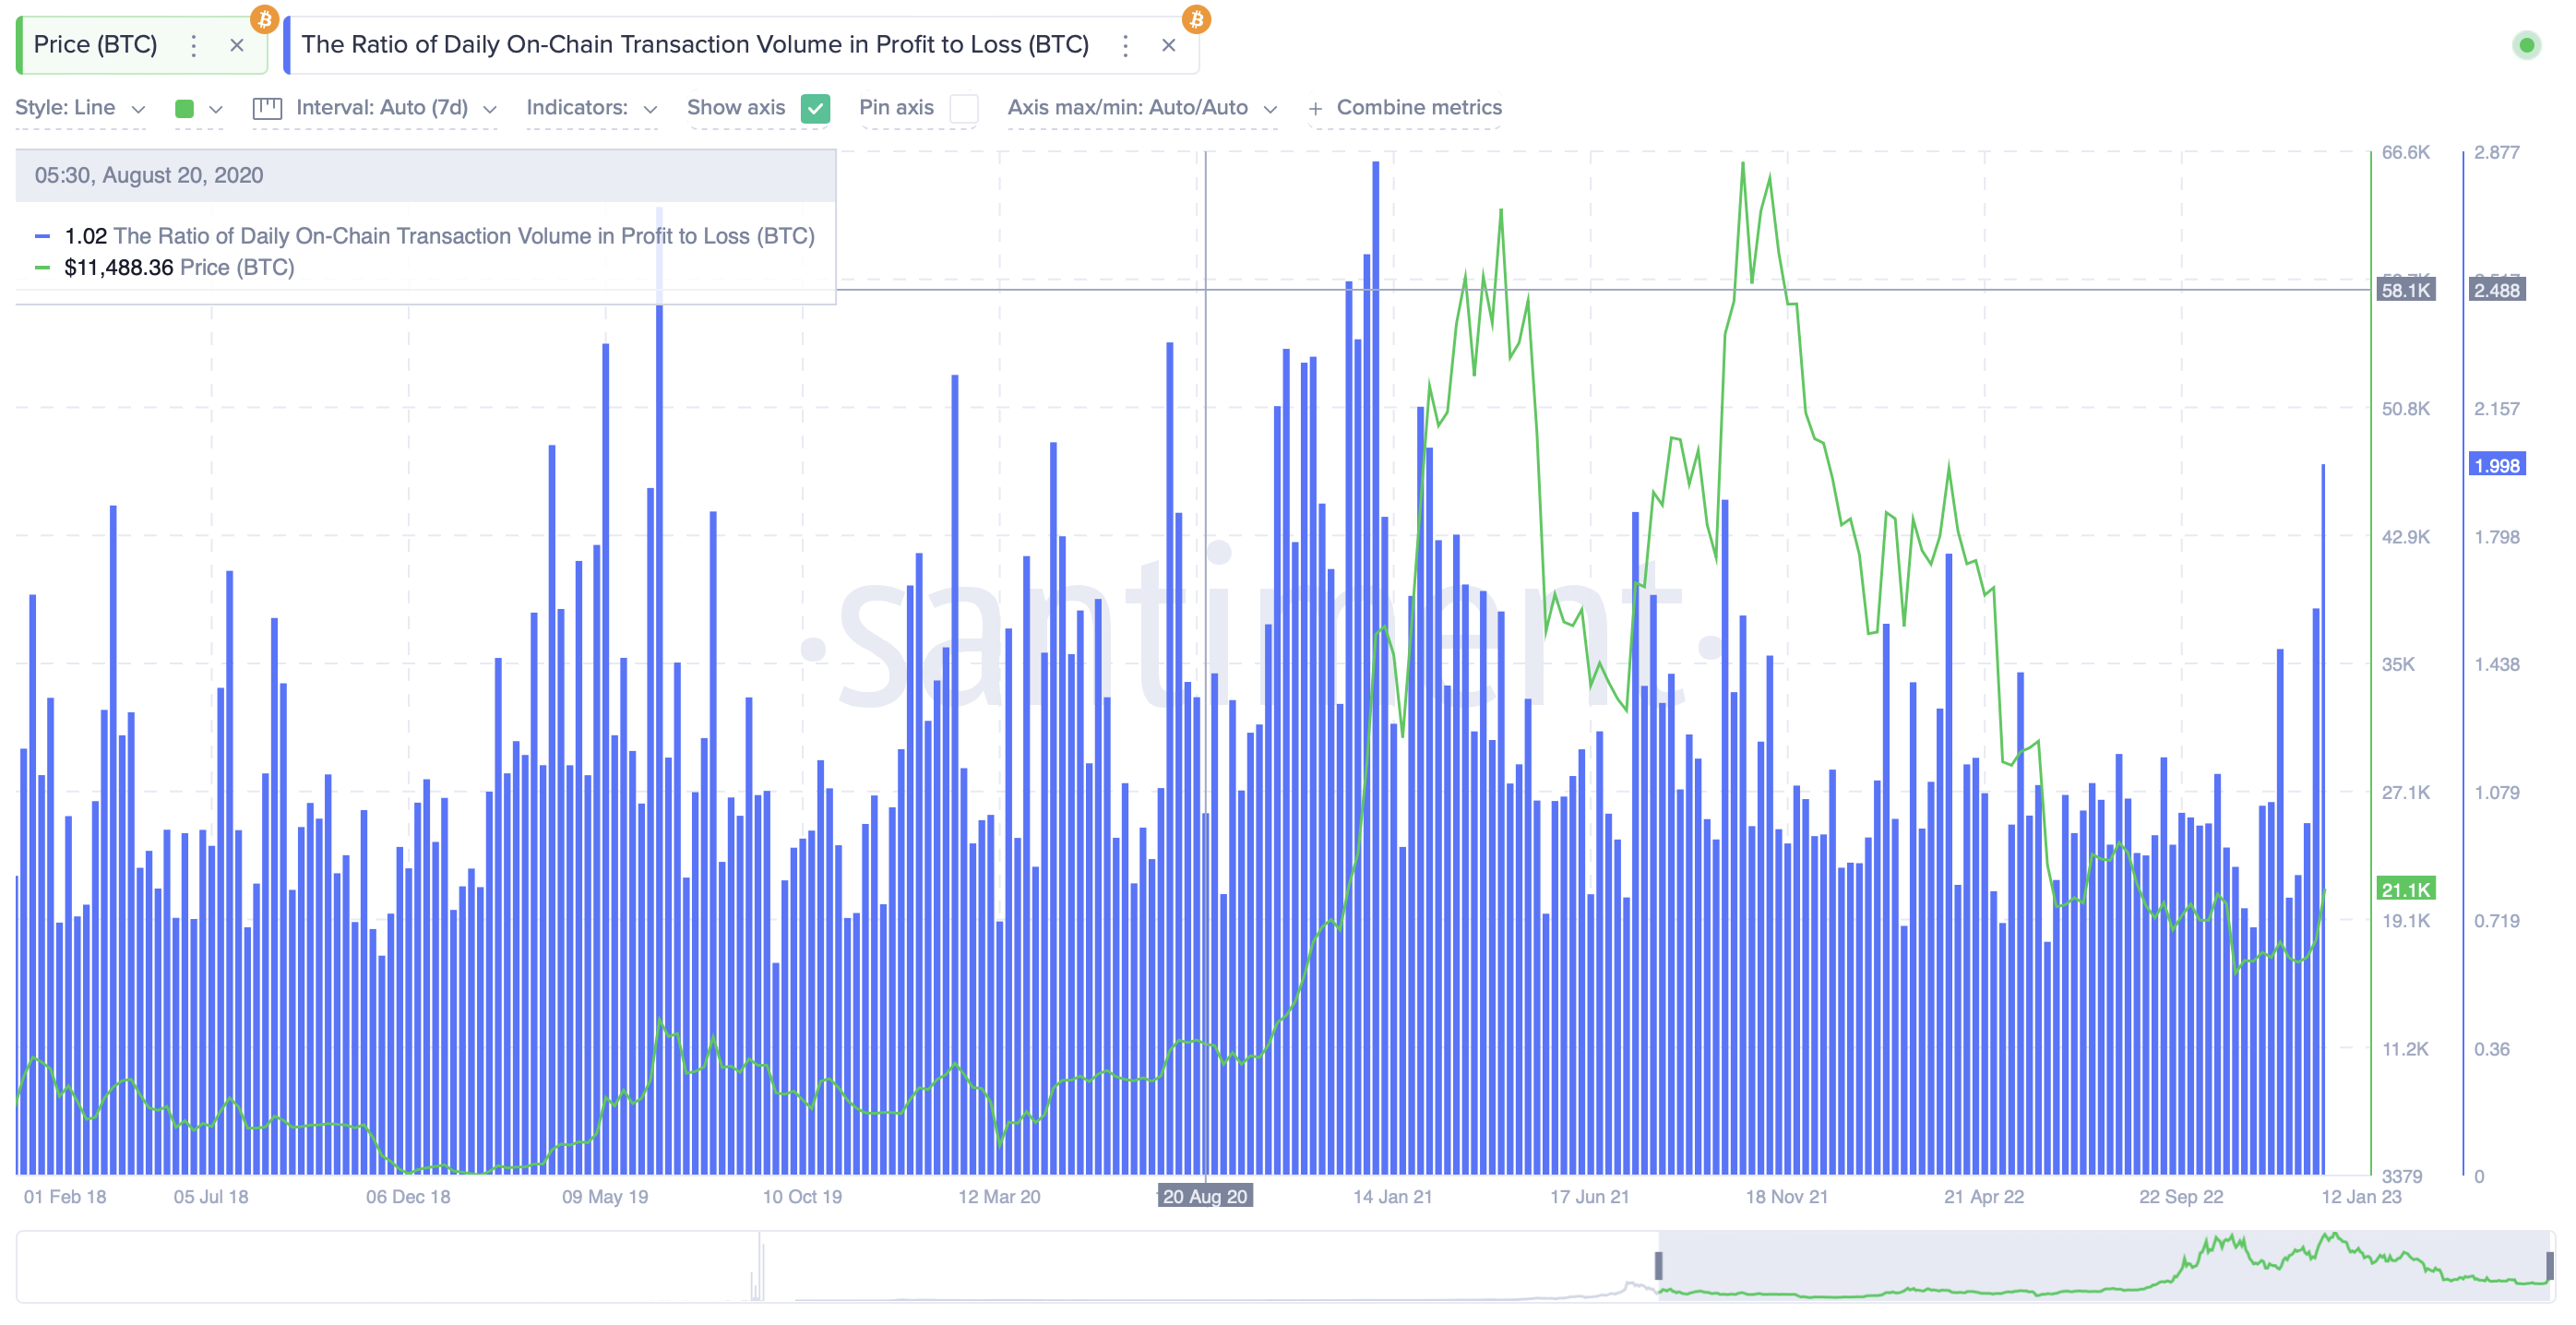 BTC ratio of daily on-chain transactions in profit to loss